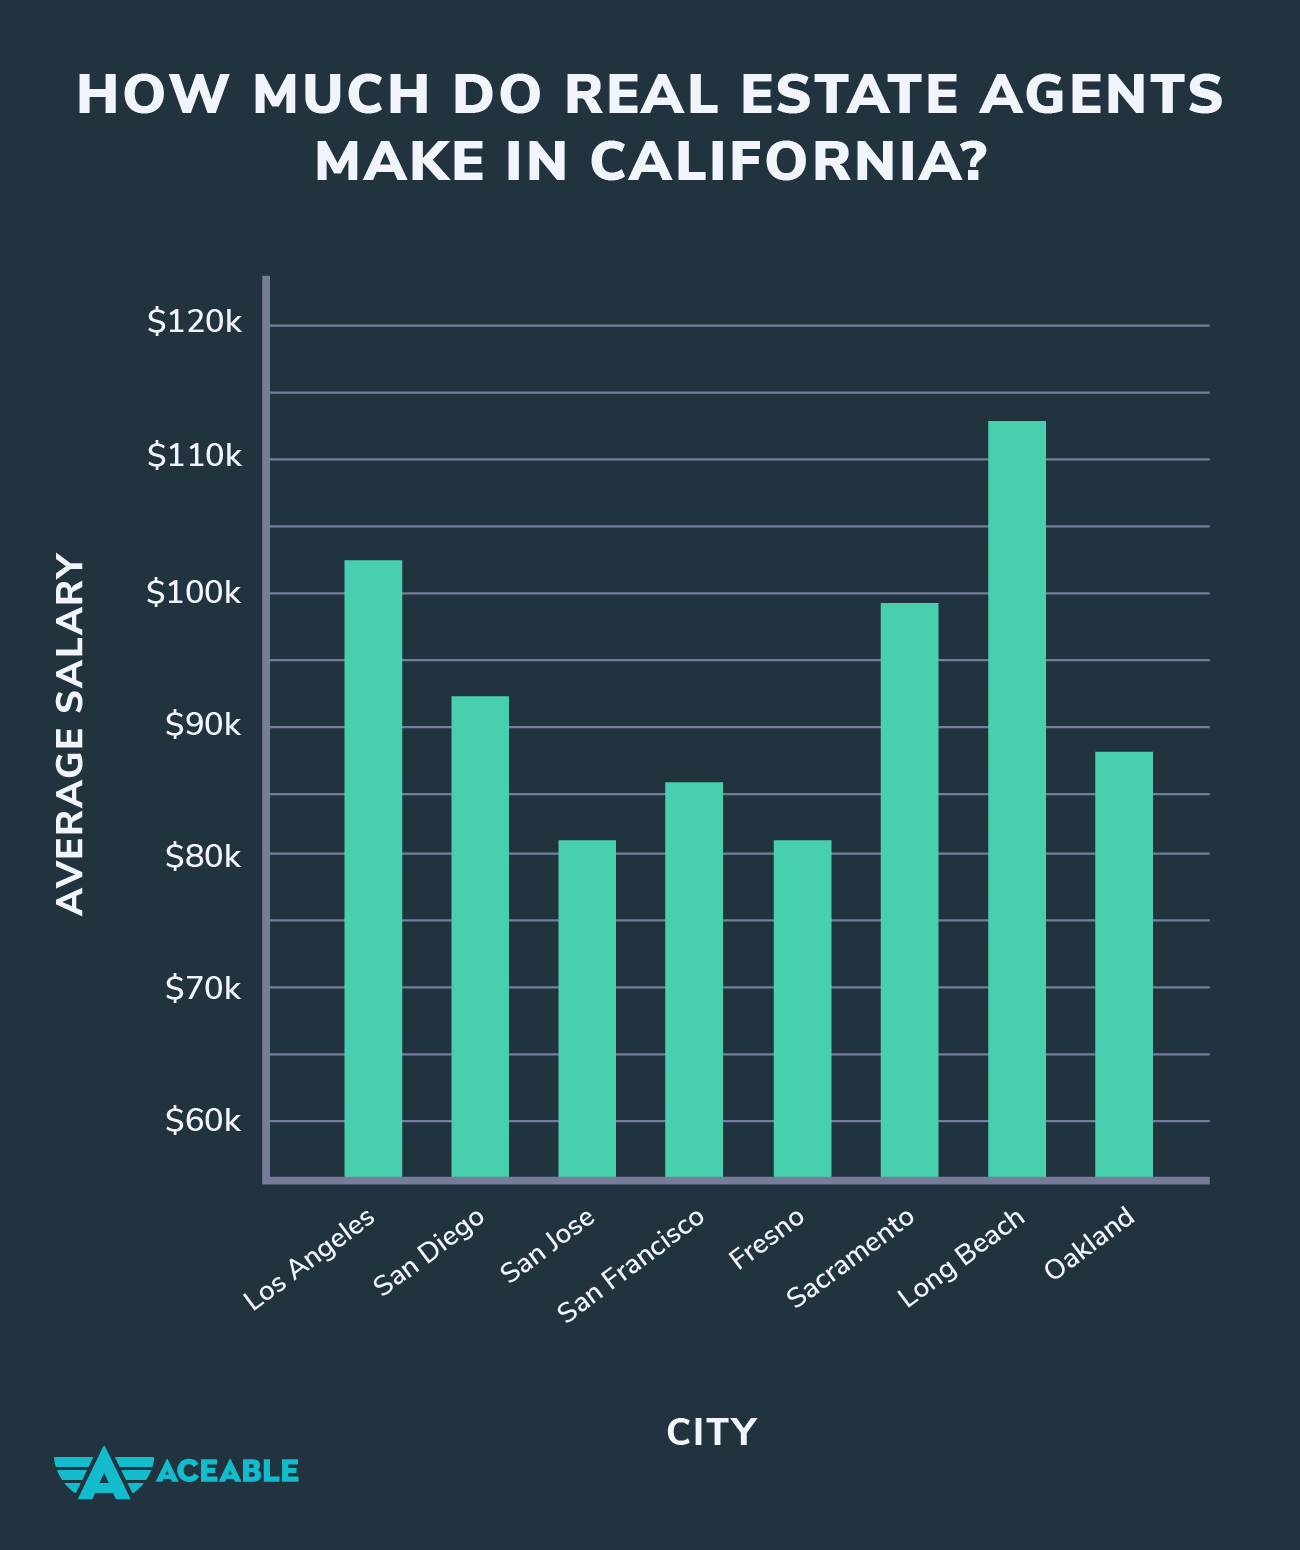 How much do real estate agents make in california graphic